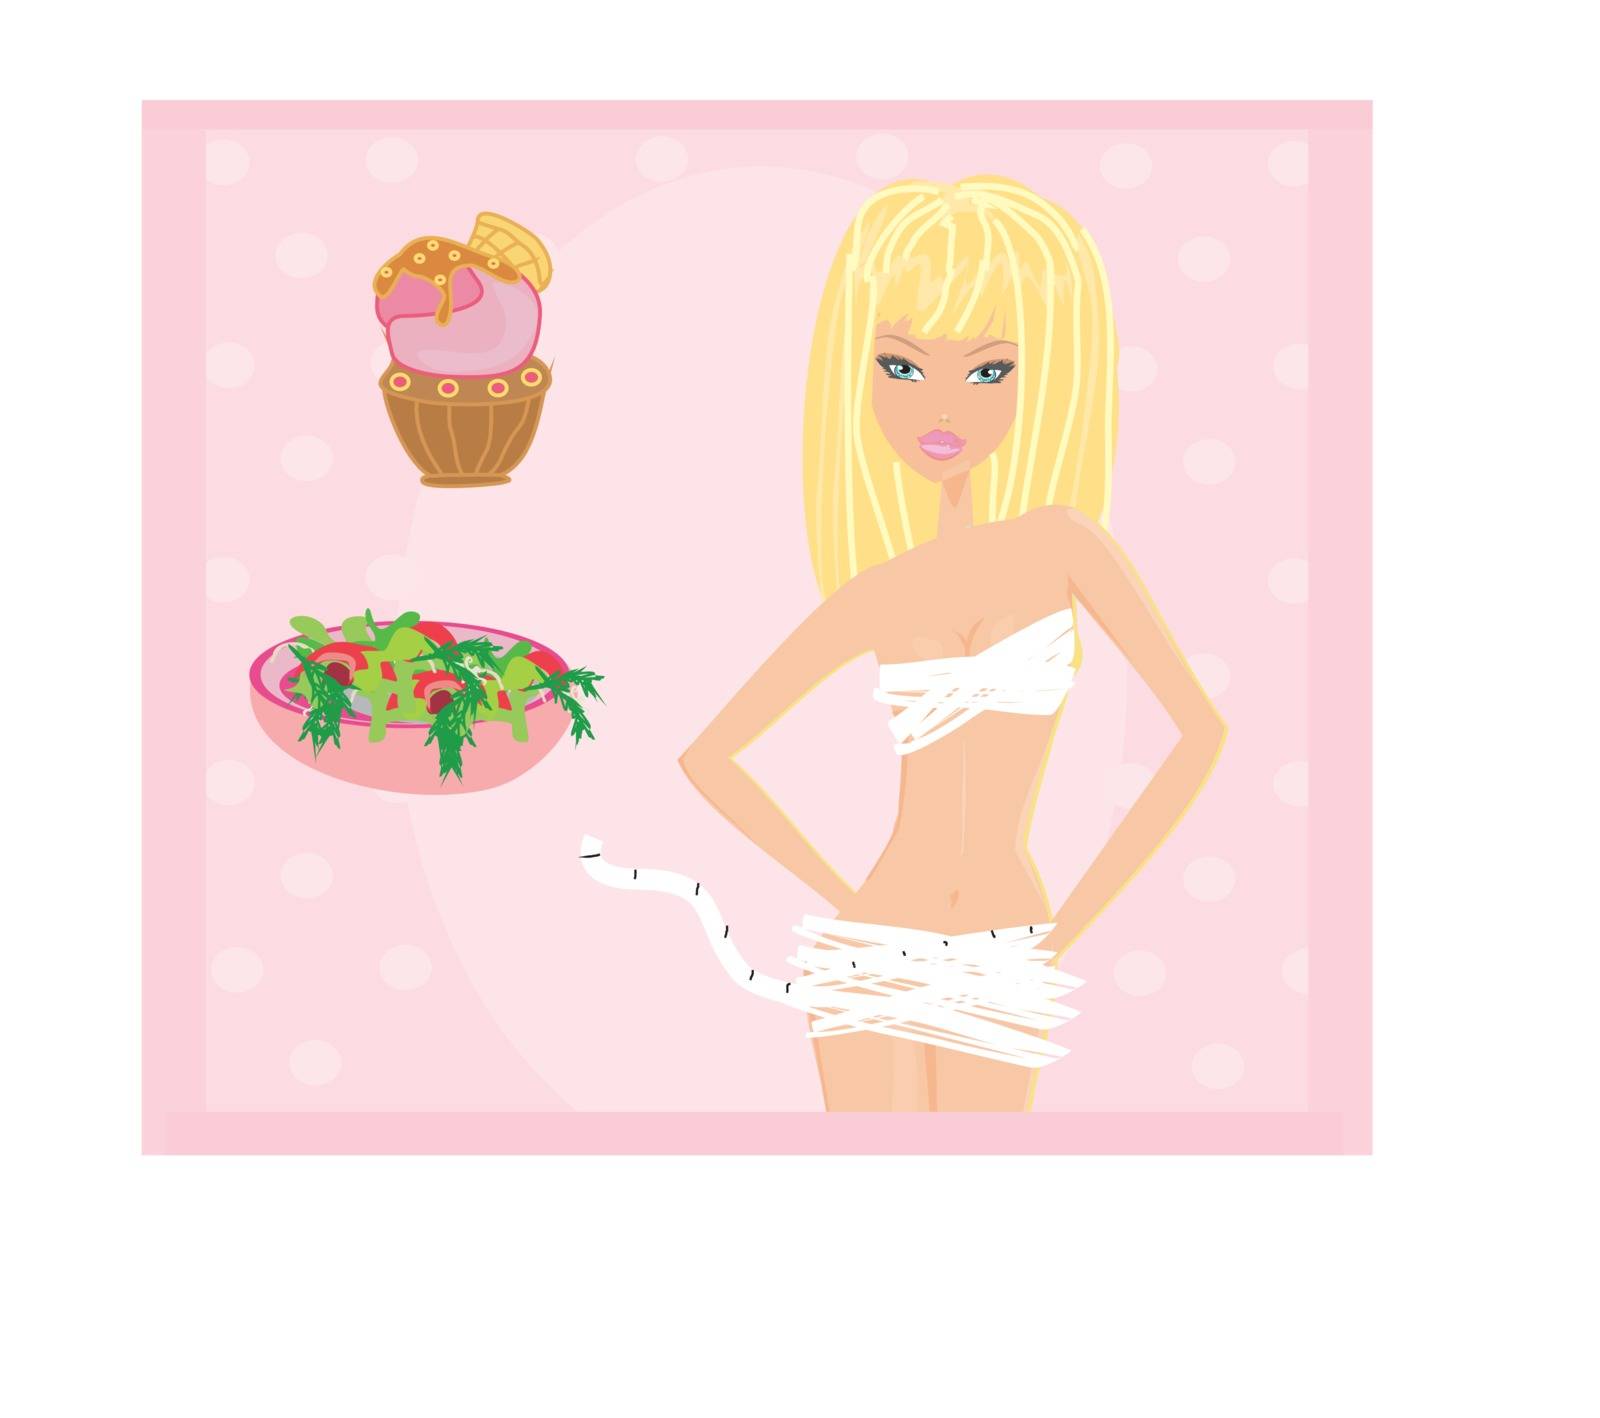 skinny girl measuring her waist and deciding between cupcakes or by JackyBrown